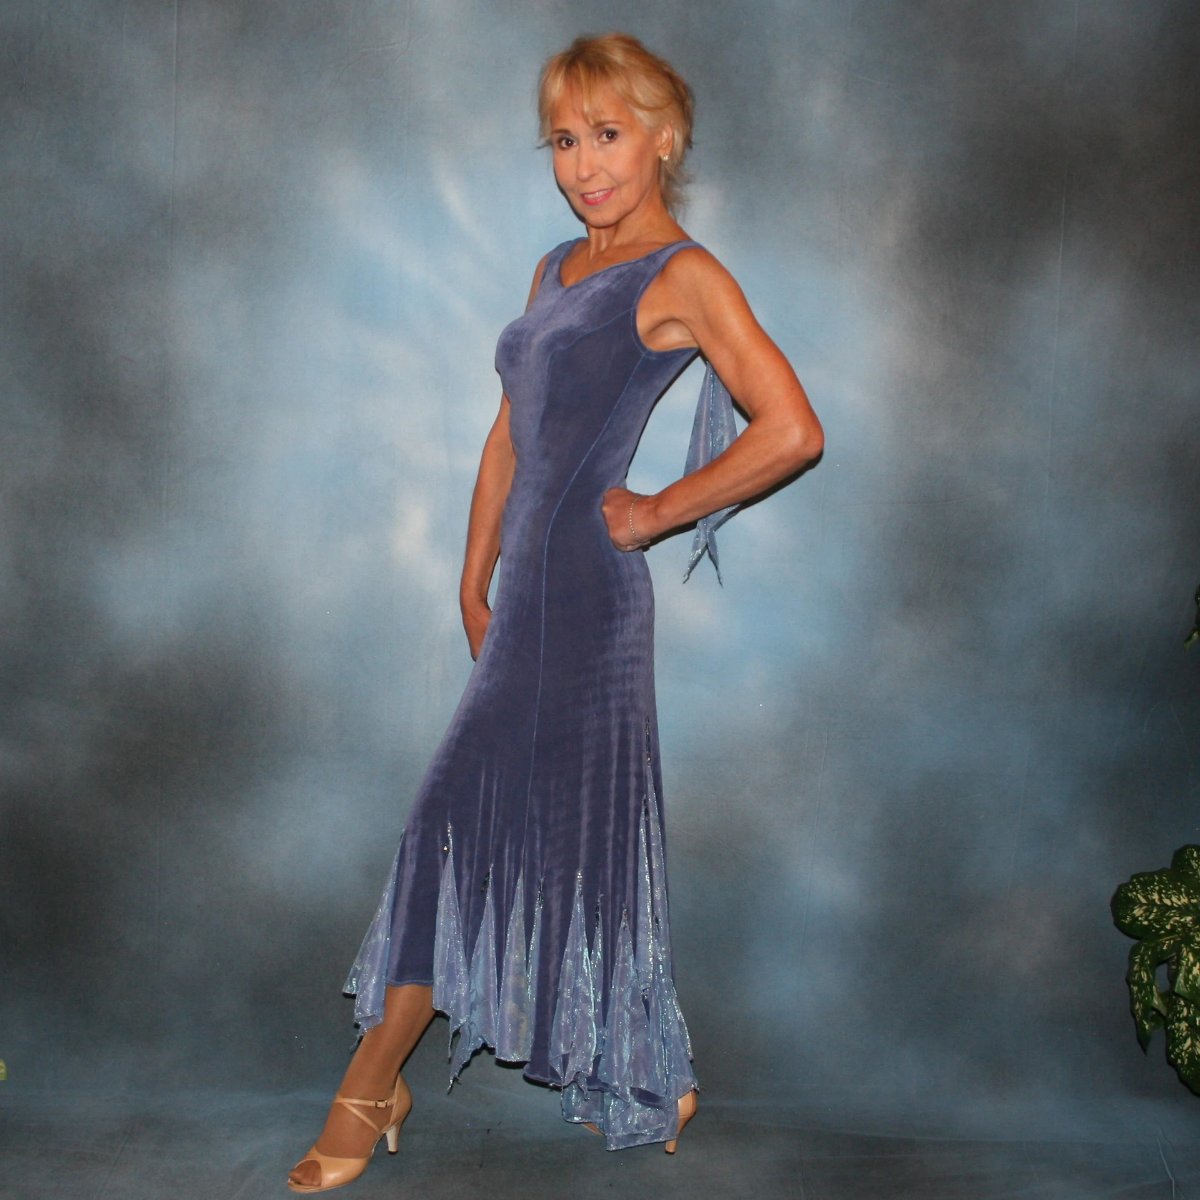 Crystal's Creations side view of Beautiful slate blue classic ballroom dress with princess seaming, created in luxurious solid slinky with iridescent insets, flounces & small floats, embellished with Swarovski hand beading. Lovely as is for any ballroom dance, social event or beginner show dance dress